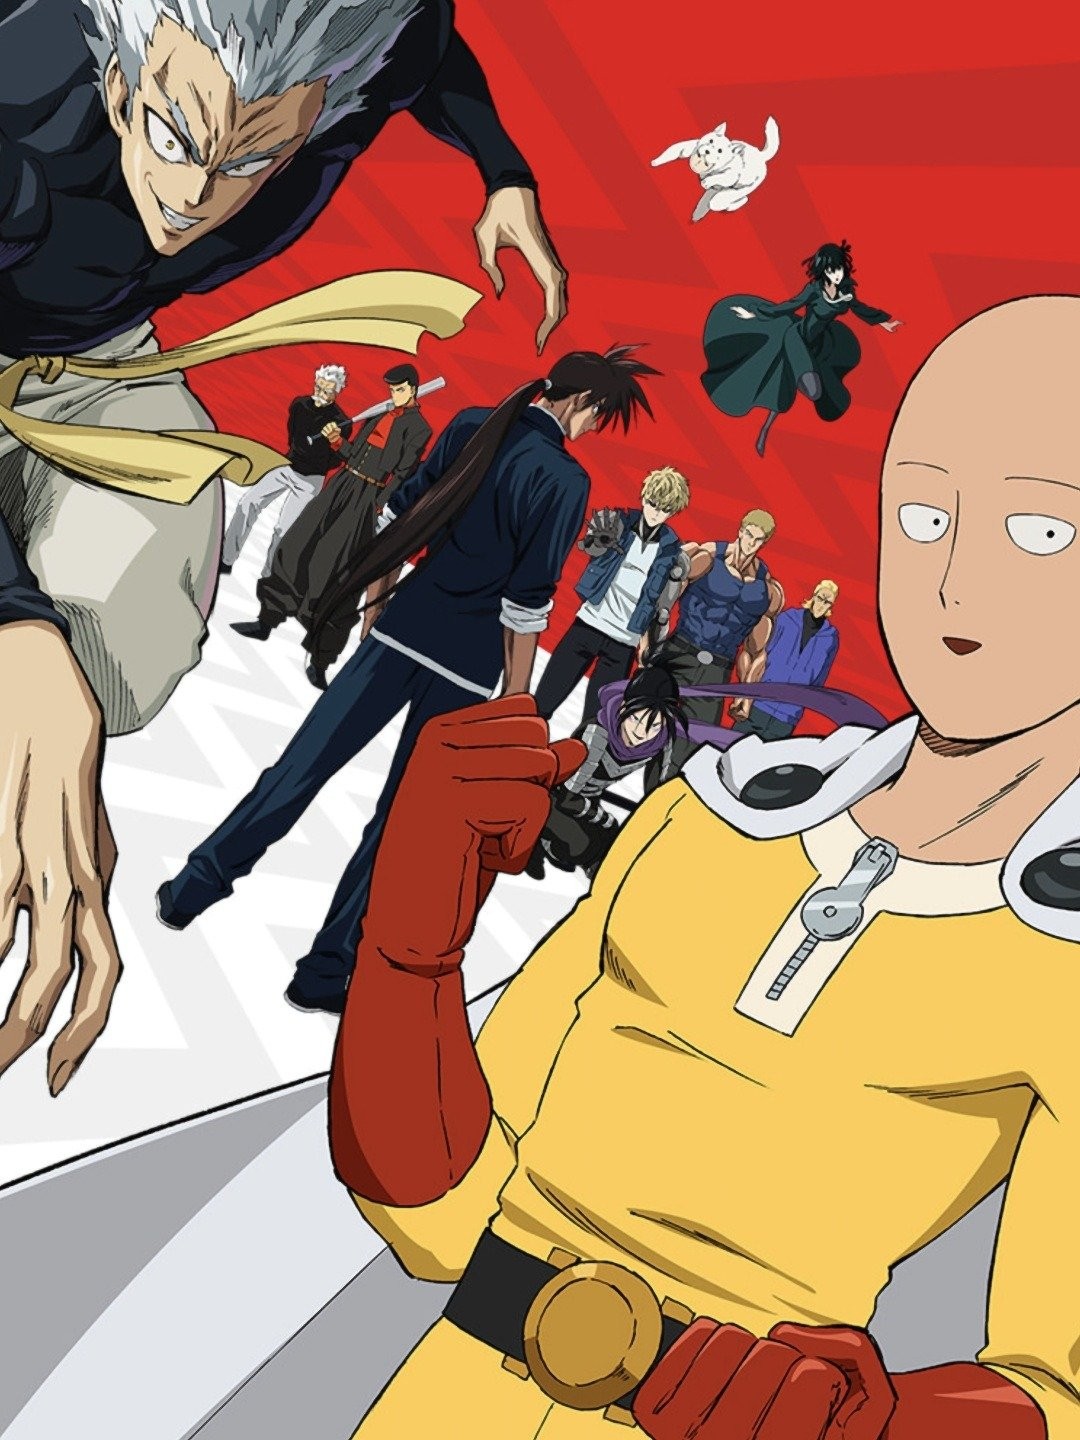 VIZ on X: One-Punch Man Season 2 has just launched! Episode 13 - Return of  the Hero is now on @Hulu! 👊 Watch now:    / X